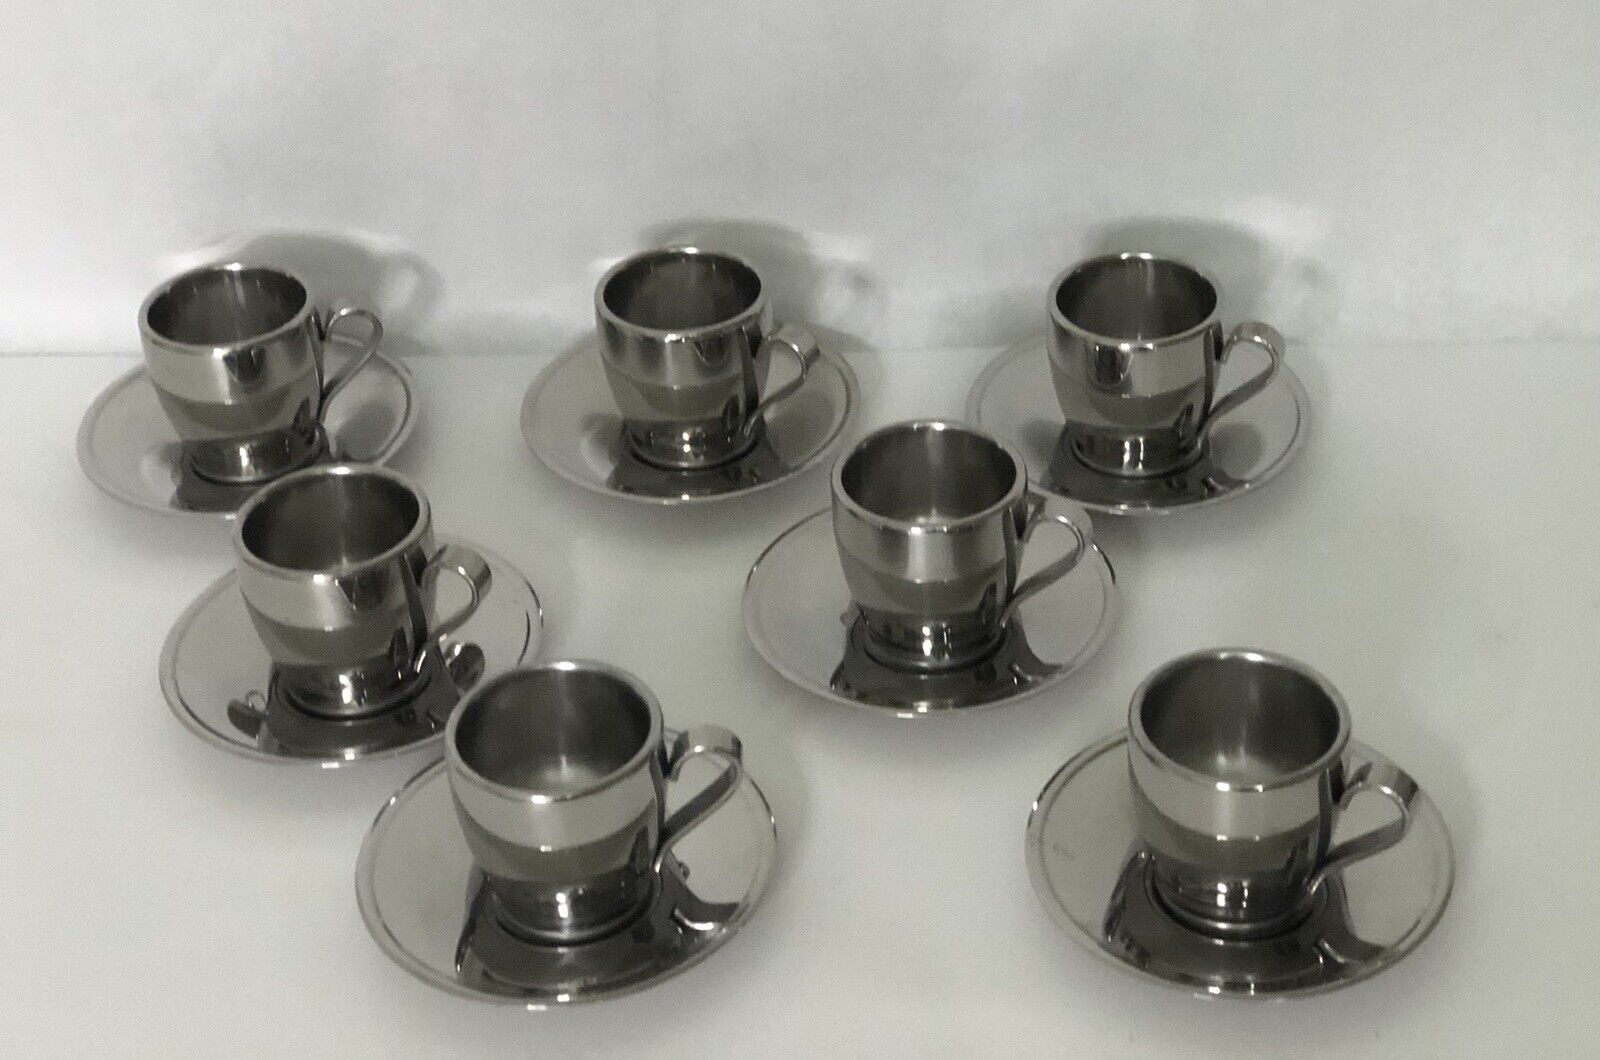 7 Meber 18/10 Stainless Double Wall Espresso Coffee Cup & Saucer Italy Vintage